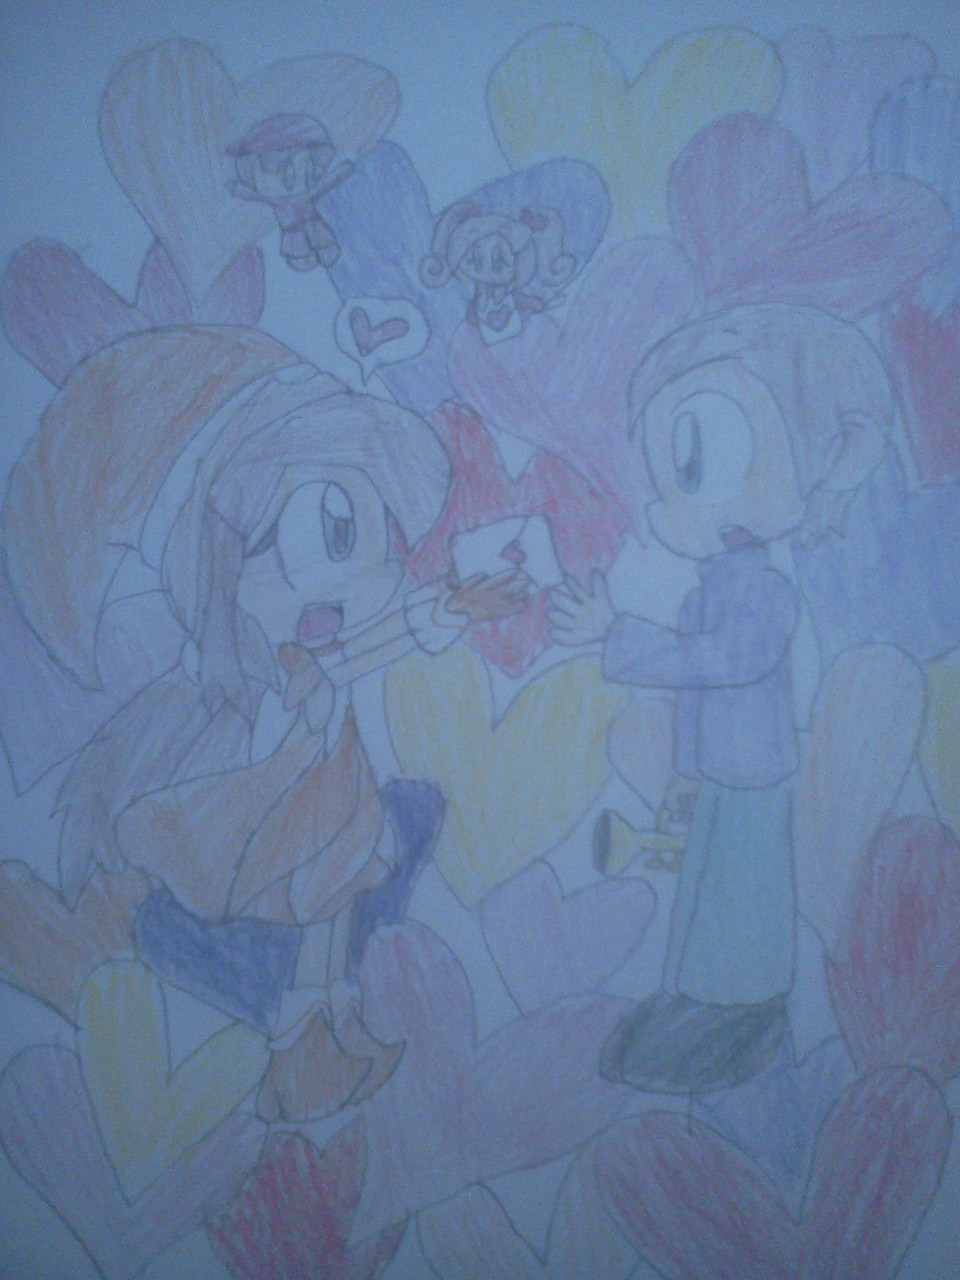 FAC Valentine's Day Contest Entry by CreamandPoppufan166